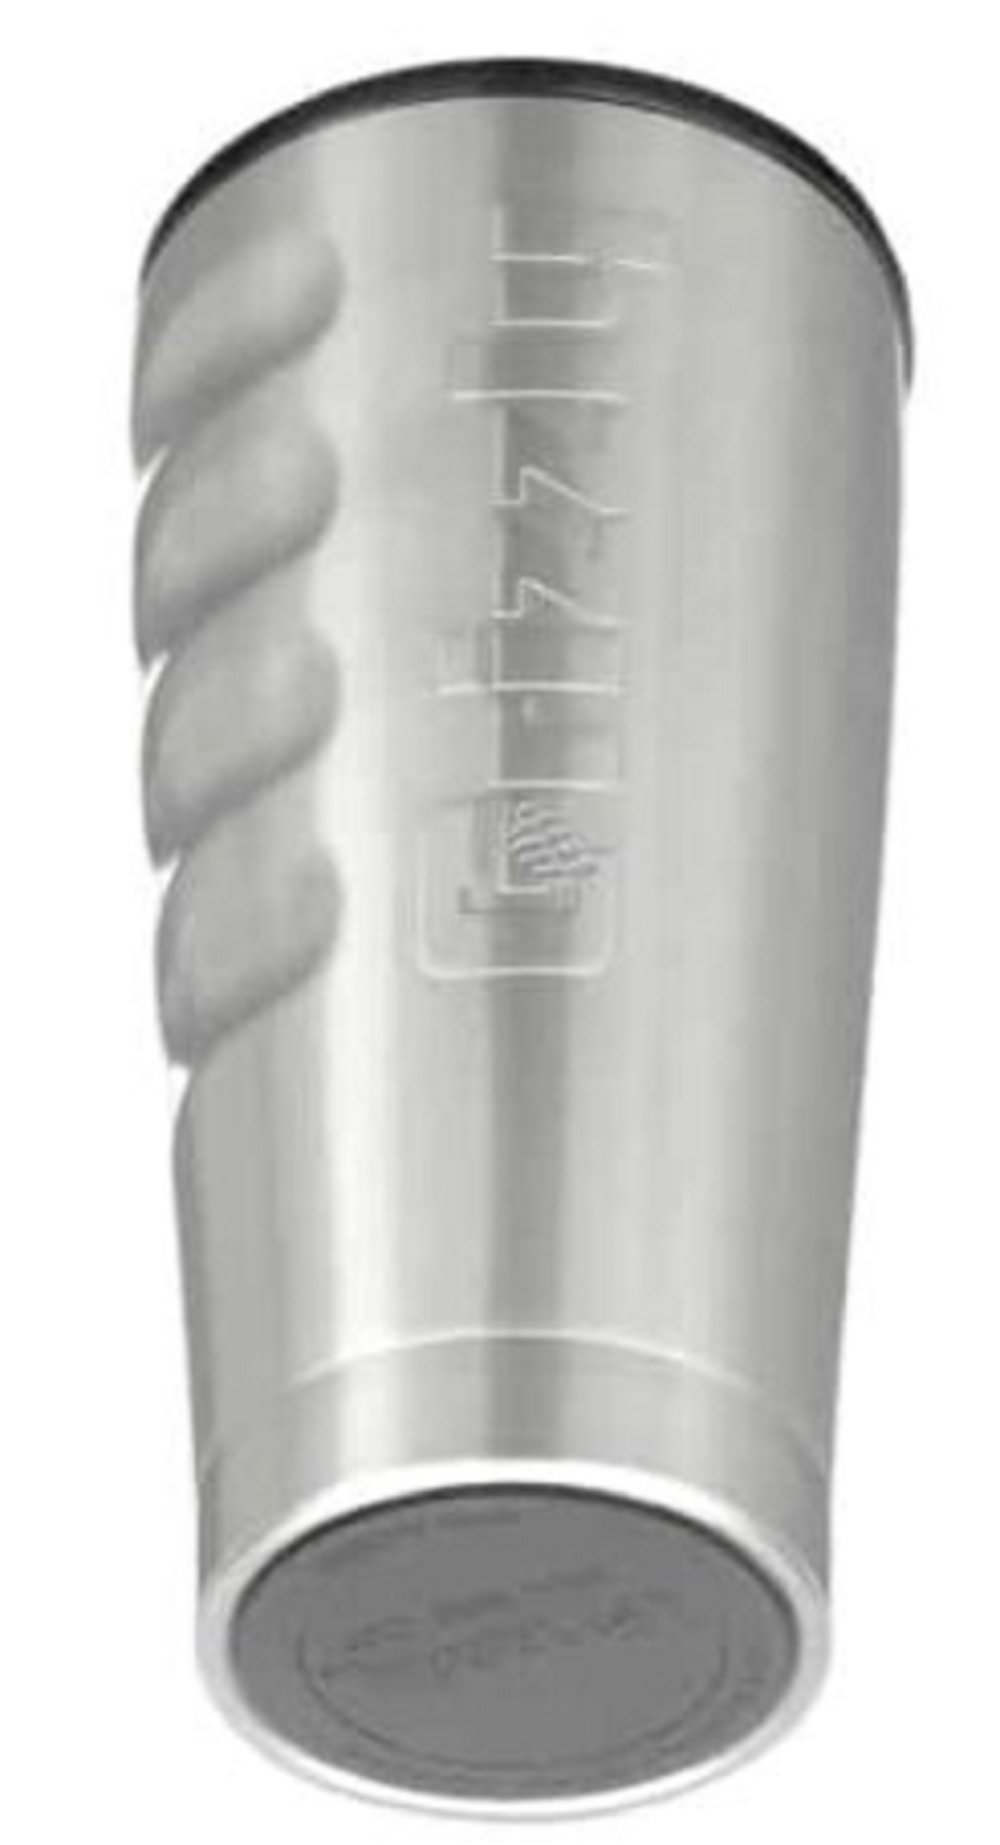 Grizzly Grip 20 oz. Stainless Steel Cup